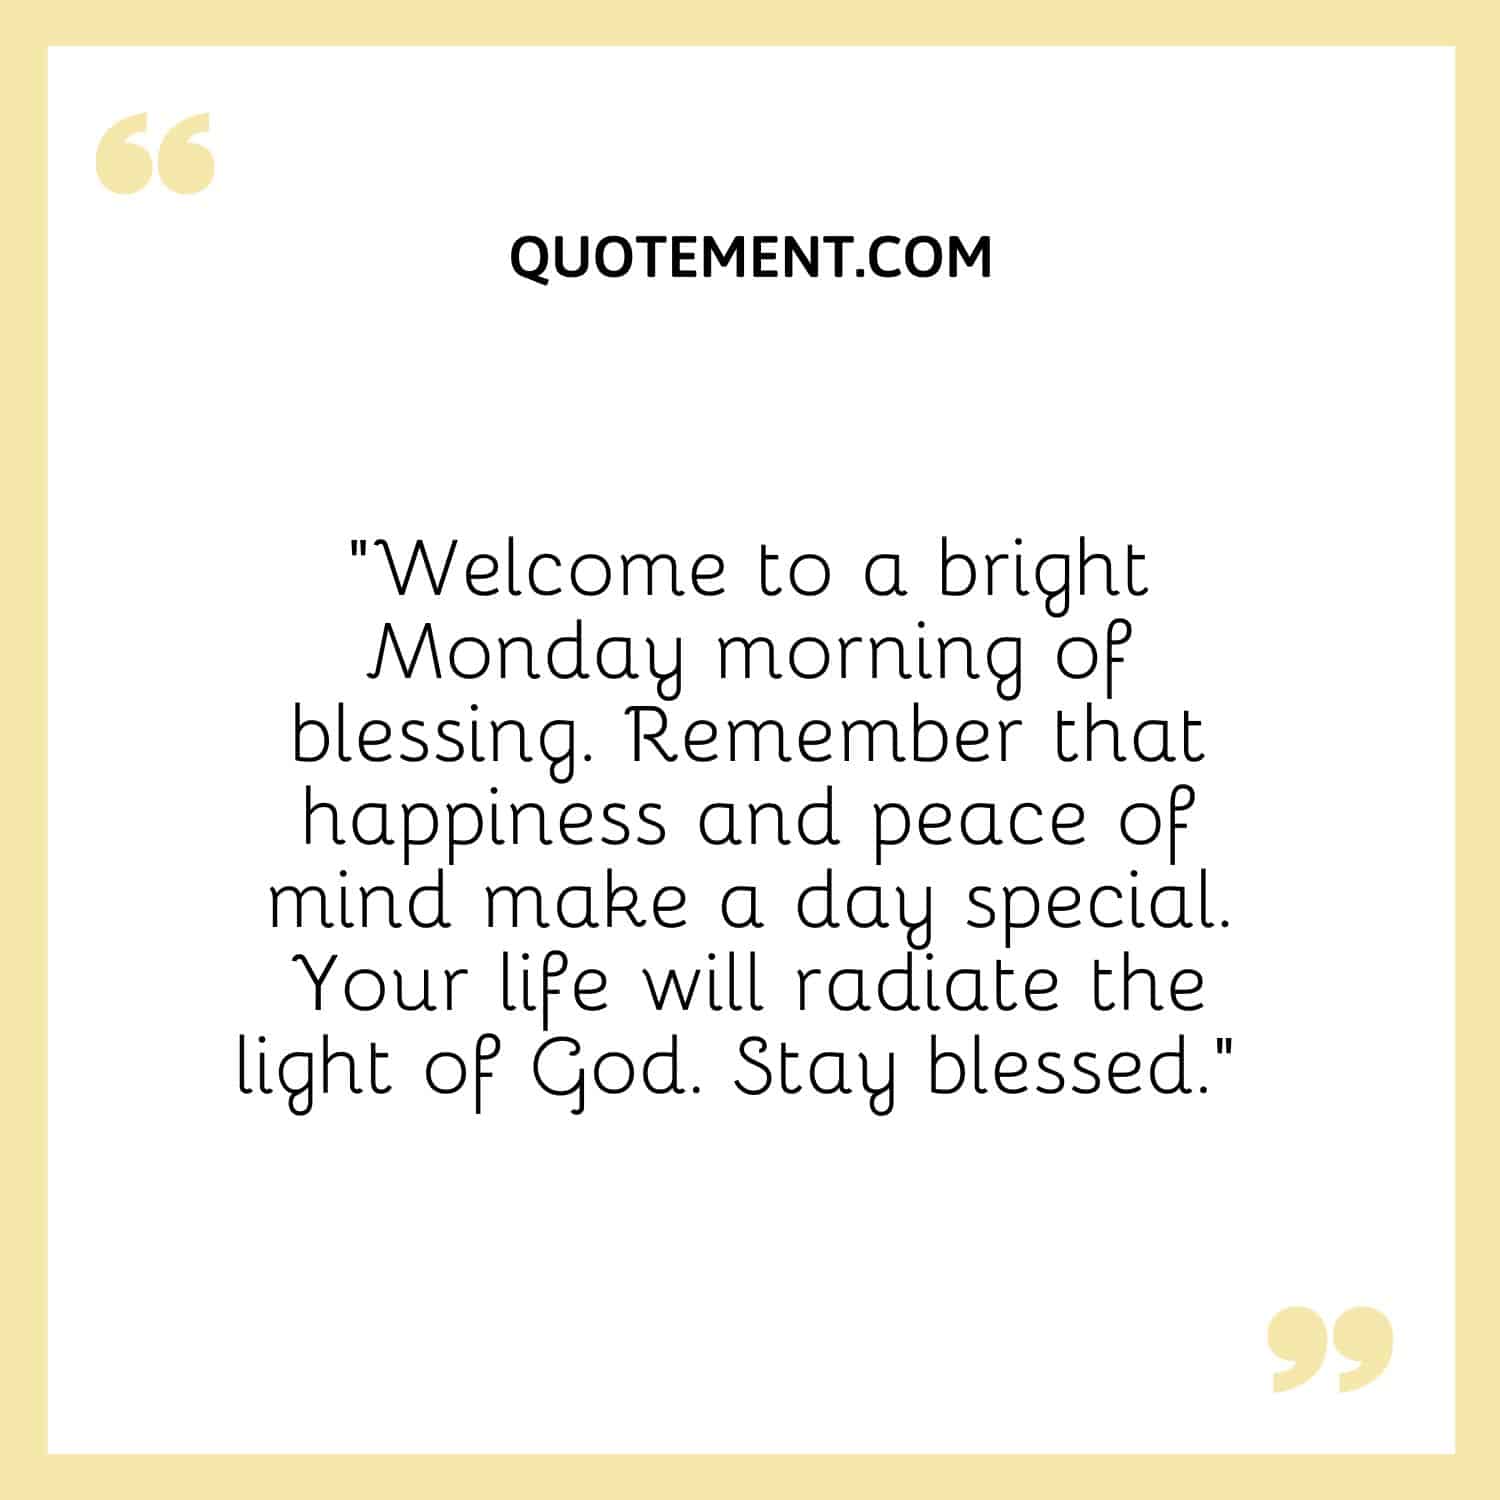 Welcome to a bright Monday morning of blessing